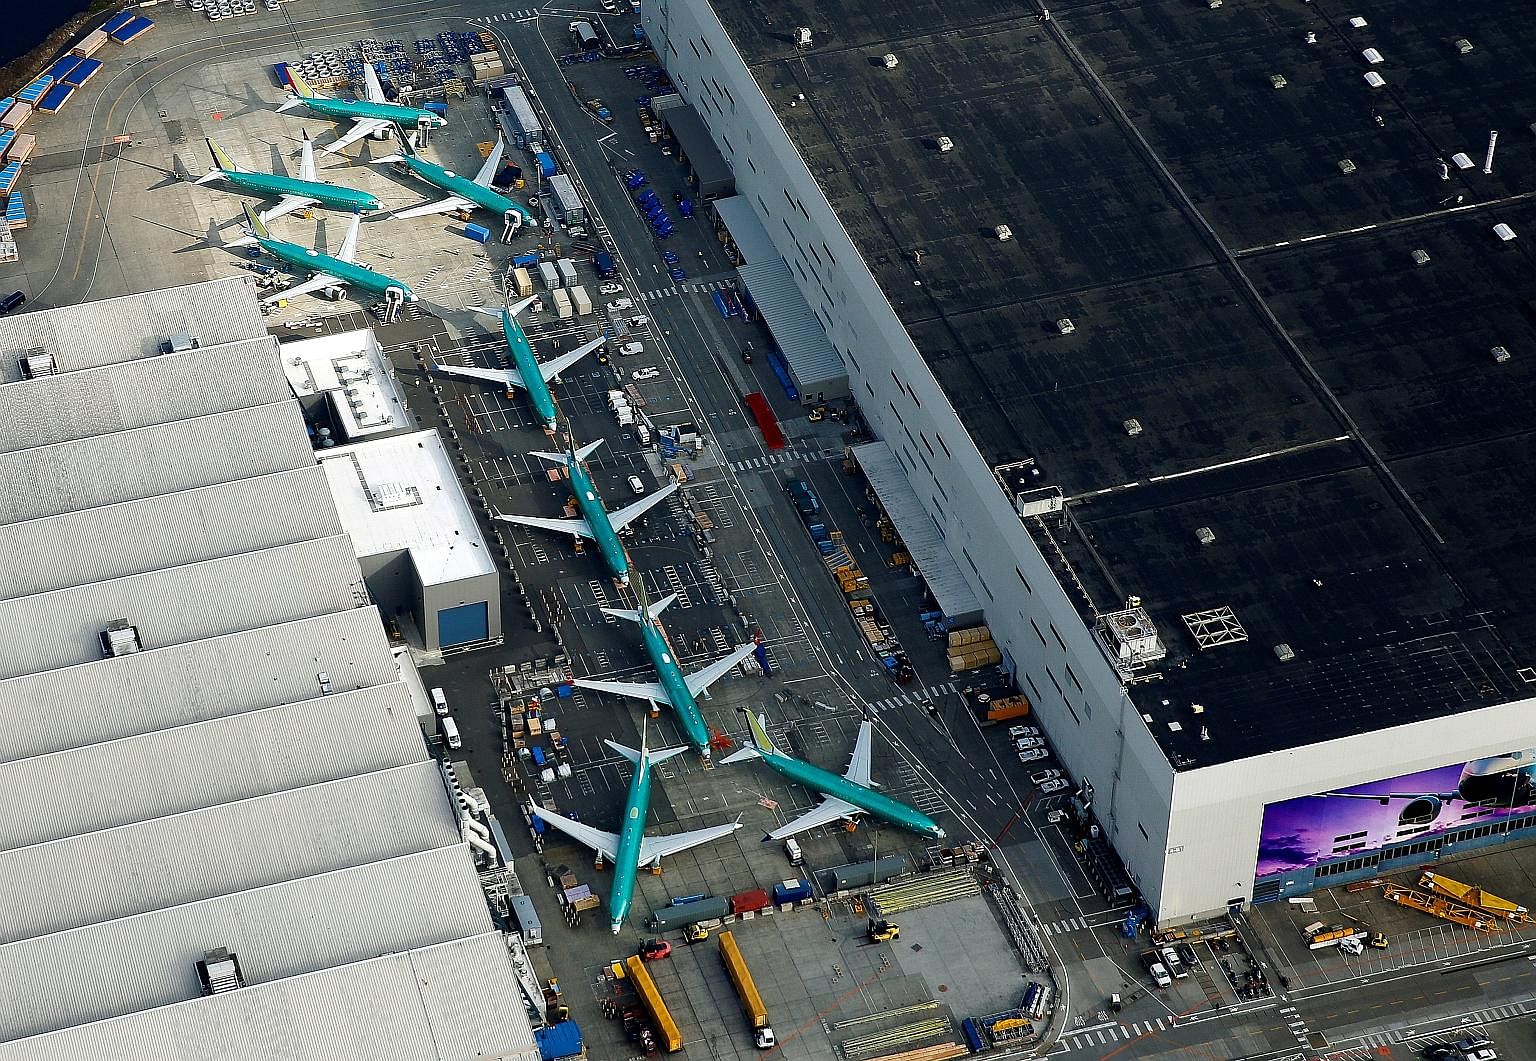 An aerial photo of Boeing 737 Max airplanes parked on the tarmac at the Boeing factory in Renton, Washington. Two crashes in five months, involving the Boeing 737 Max 8, have raised serious concerns and questions about how planes are made and certifi